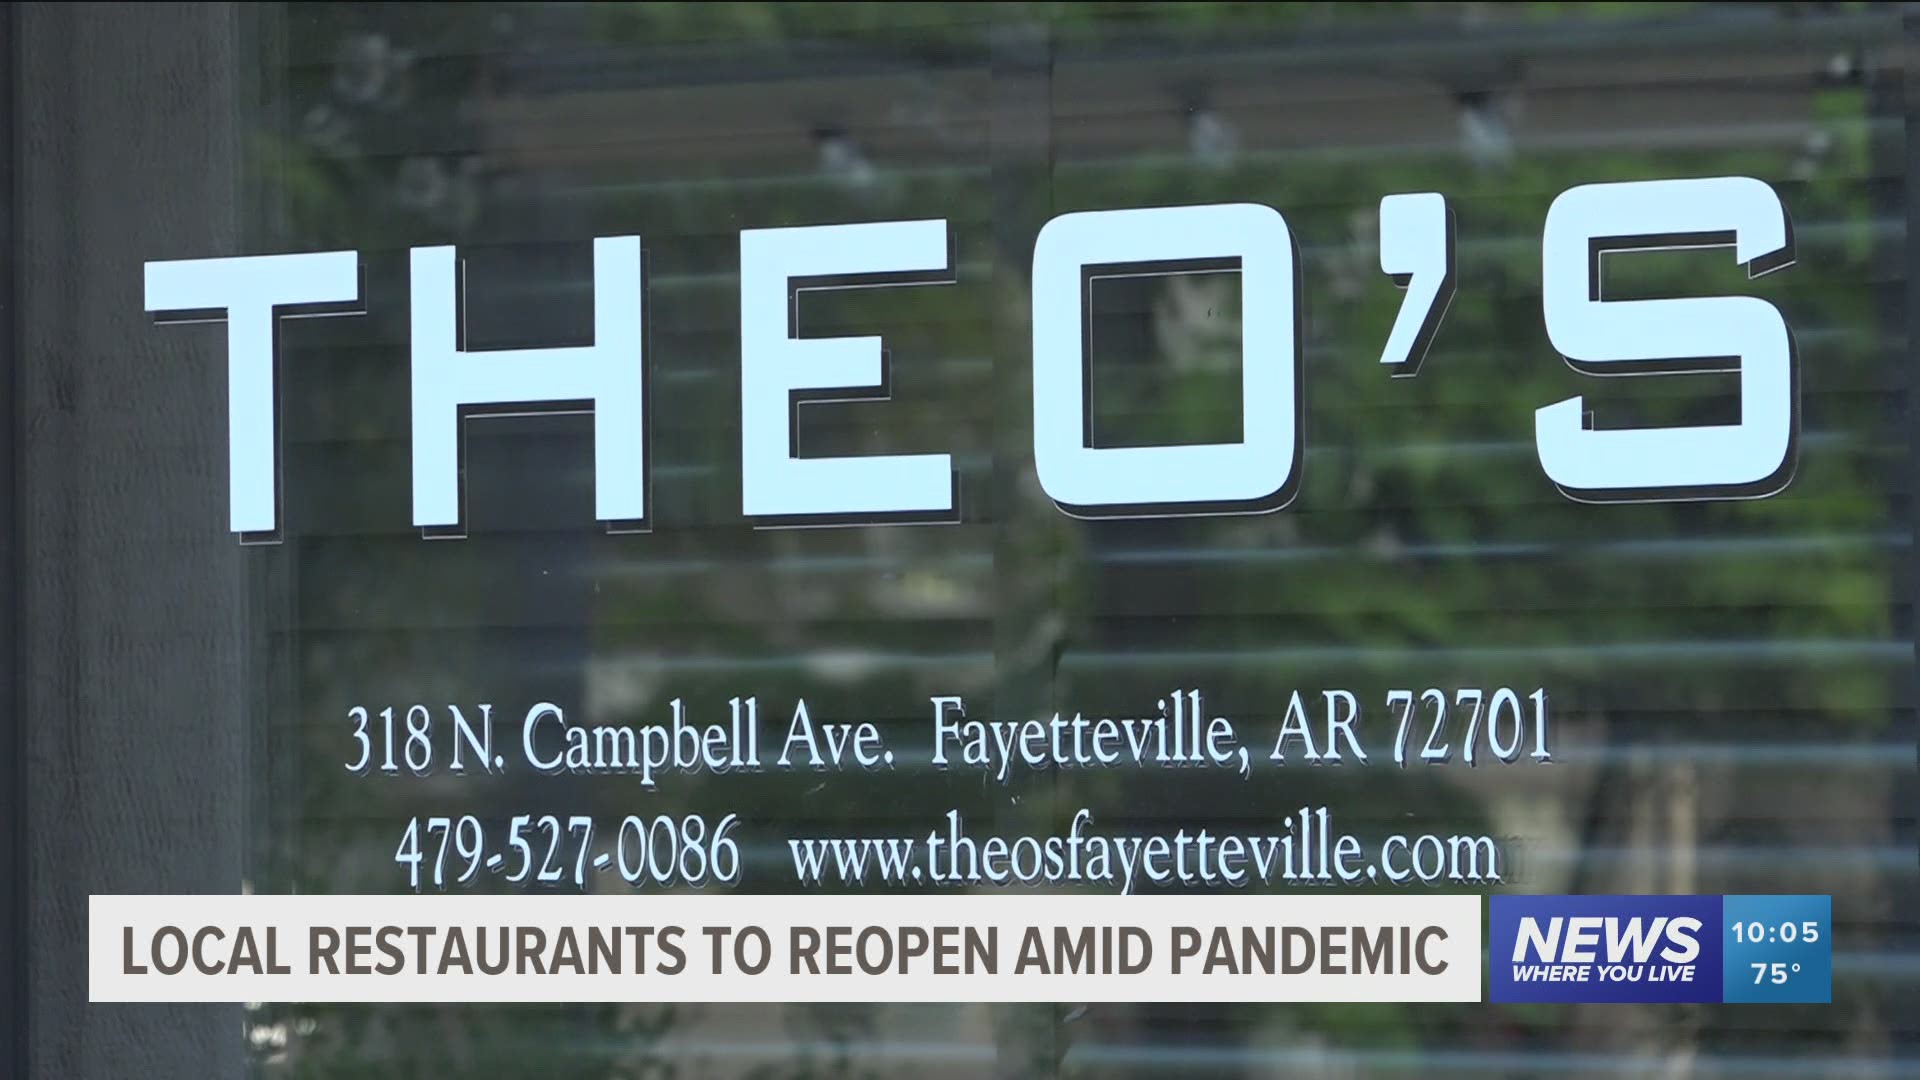 Local restaurants to reopen amid pandemic.